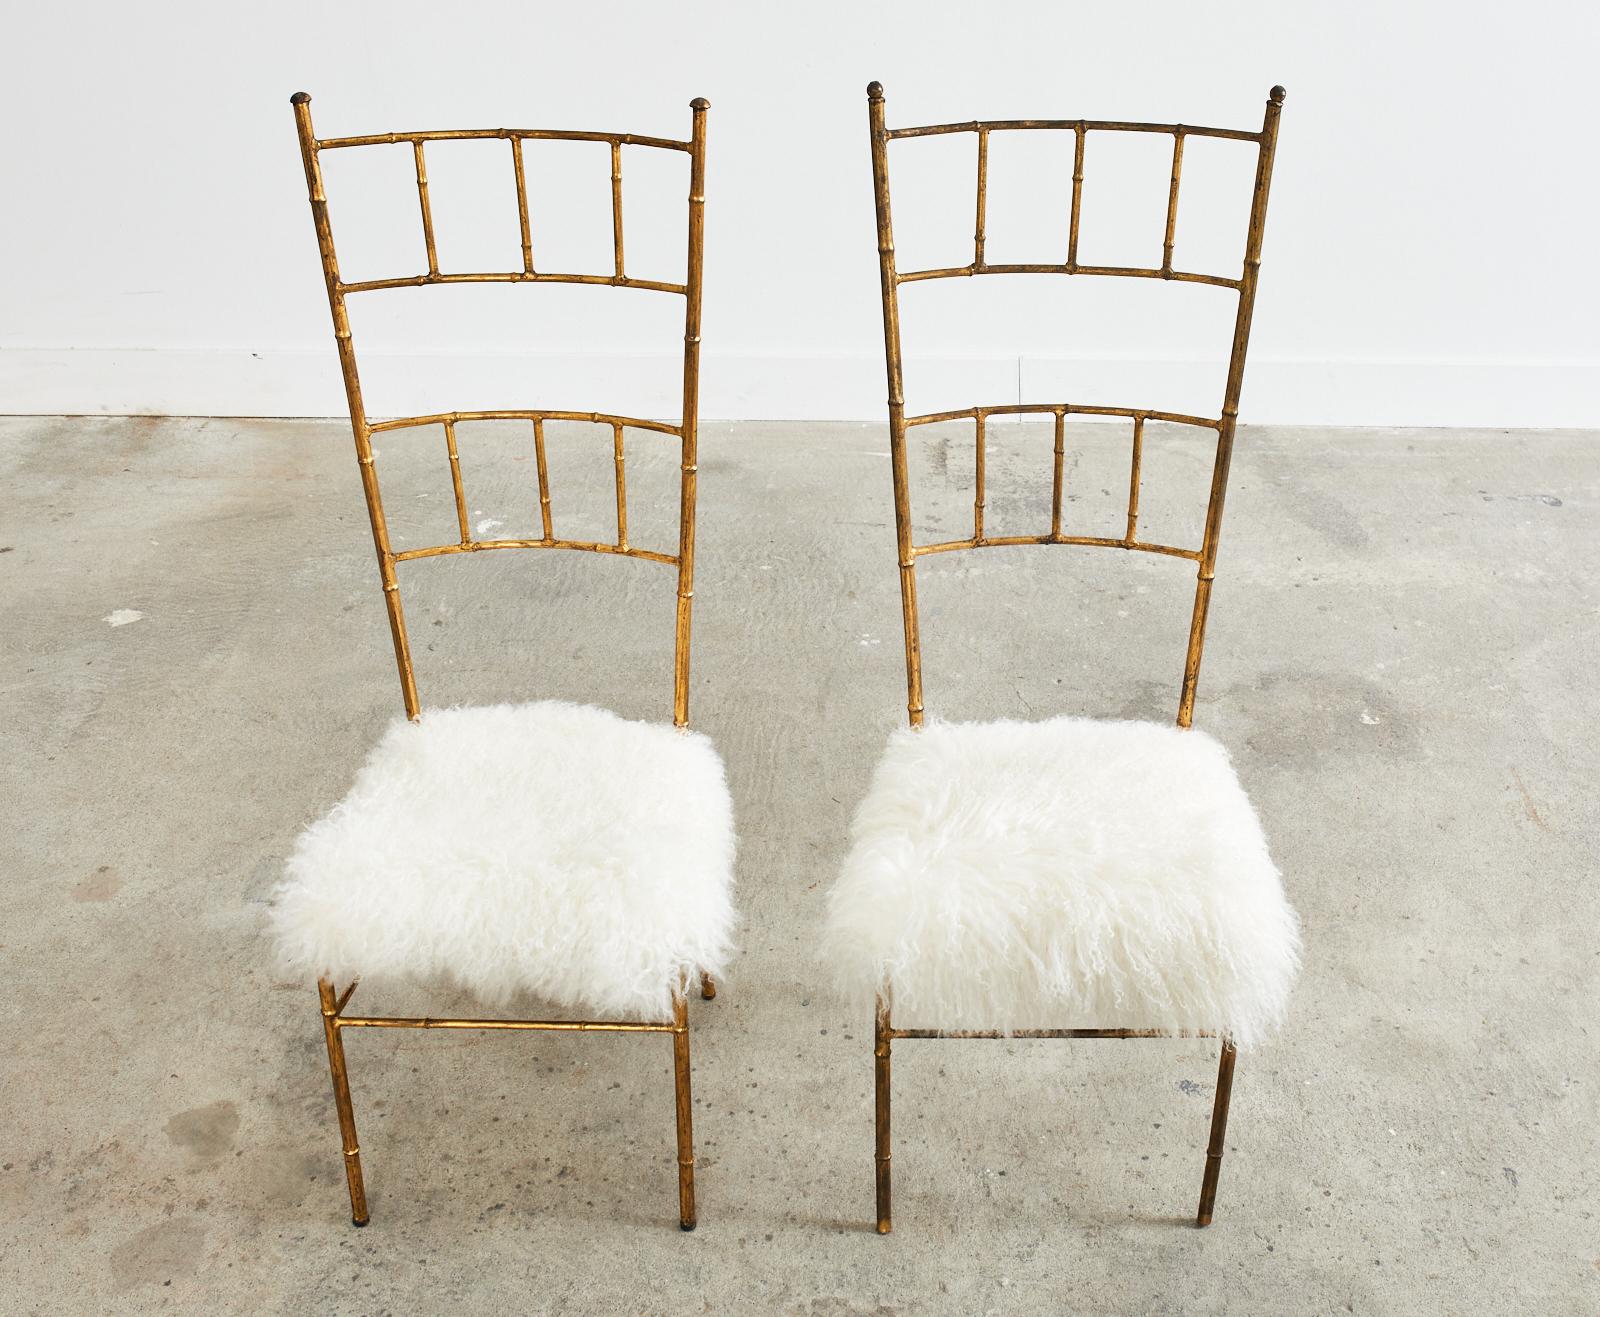 20th Century Pair of Italian Faux Bamboo Gilt Chiavari Style Chairs For Sale